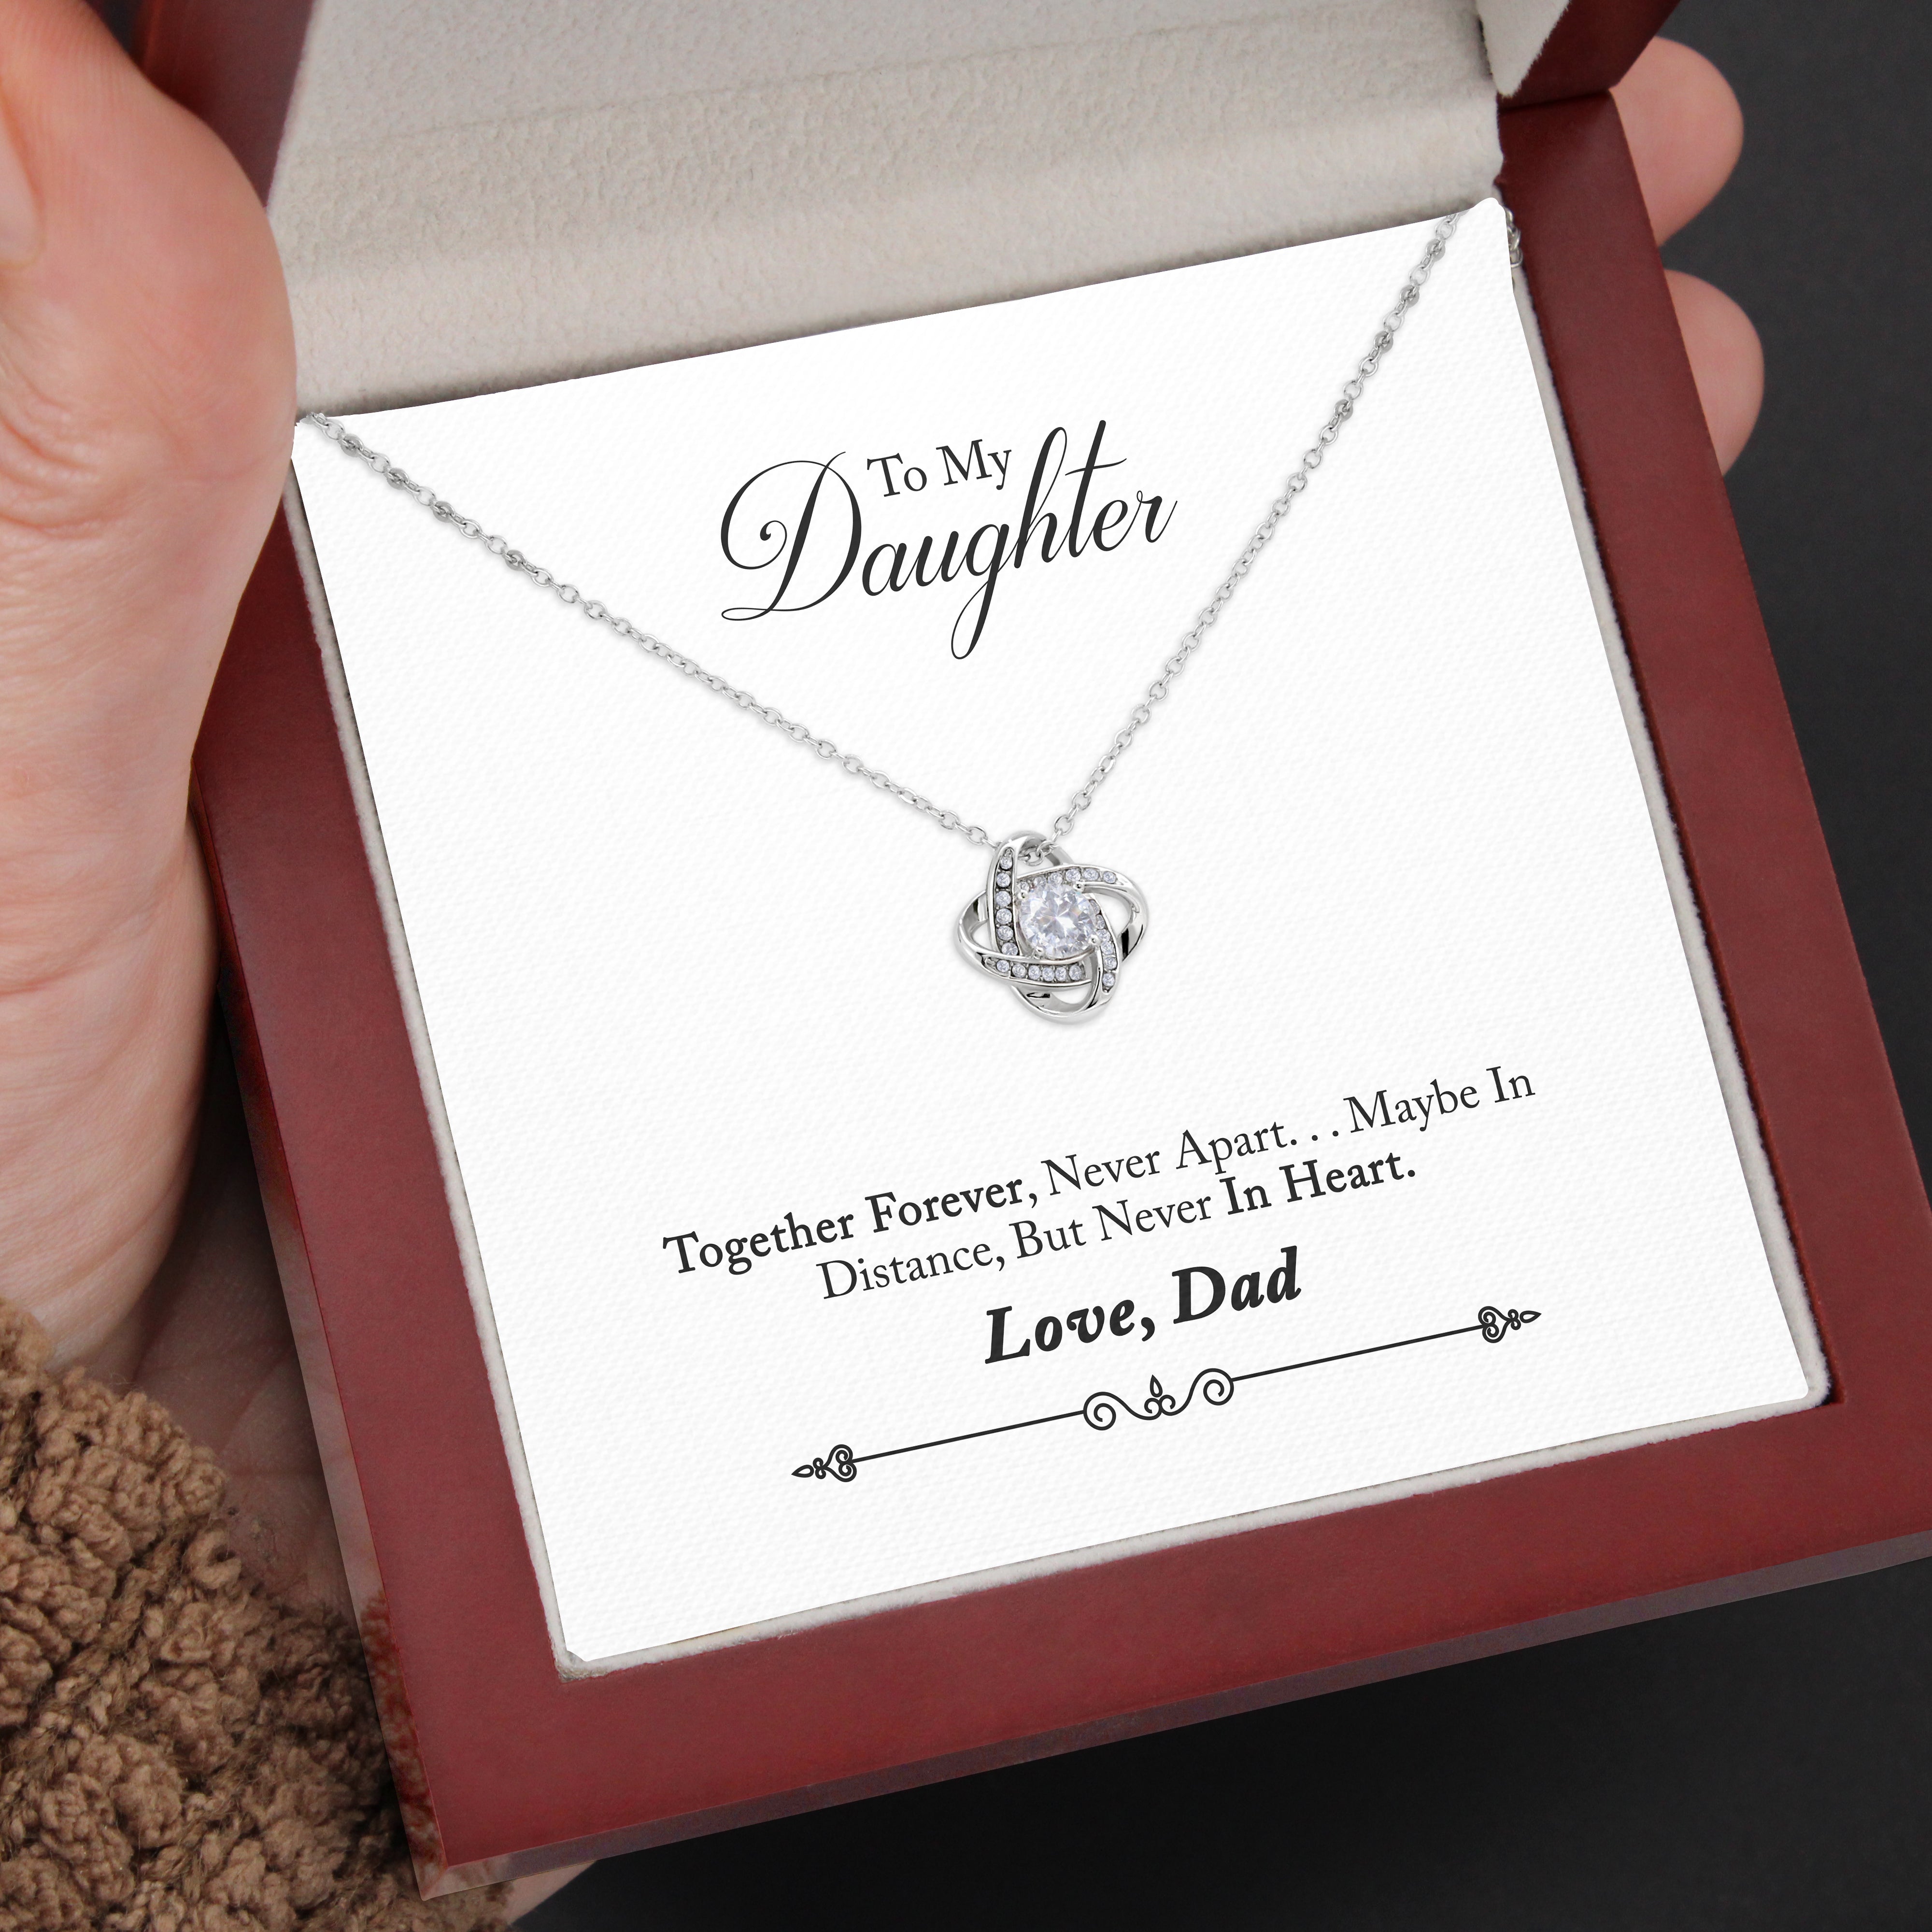 To My Daughter | "Together Forever" | Love Knot Necklace